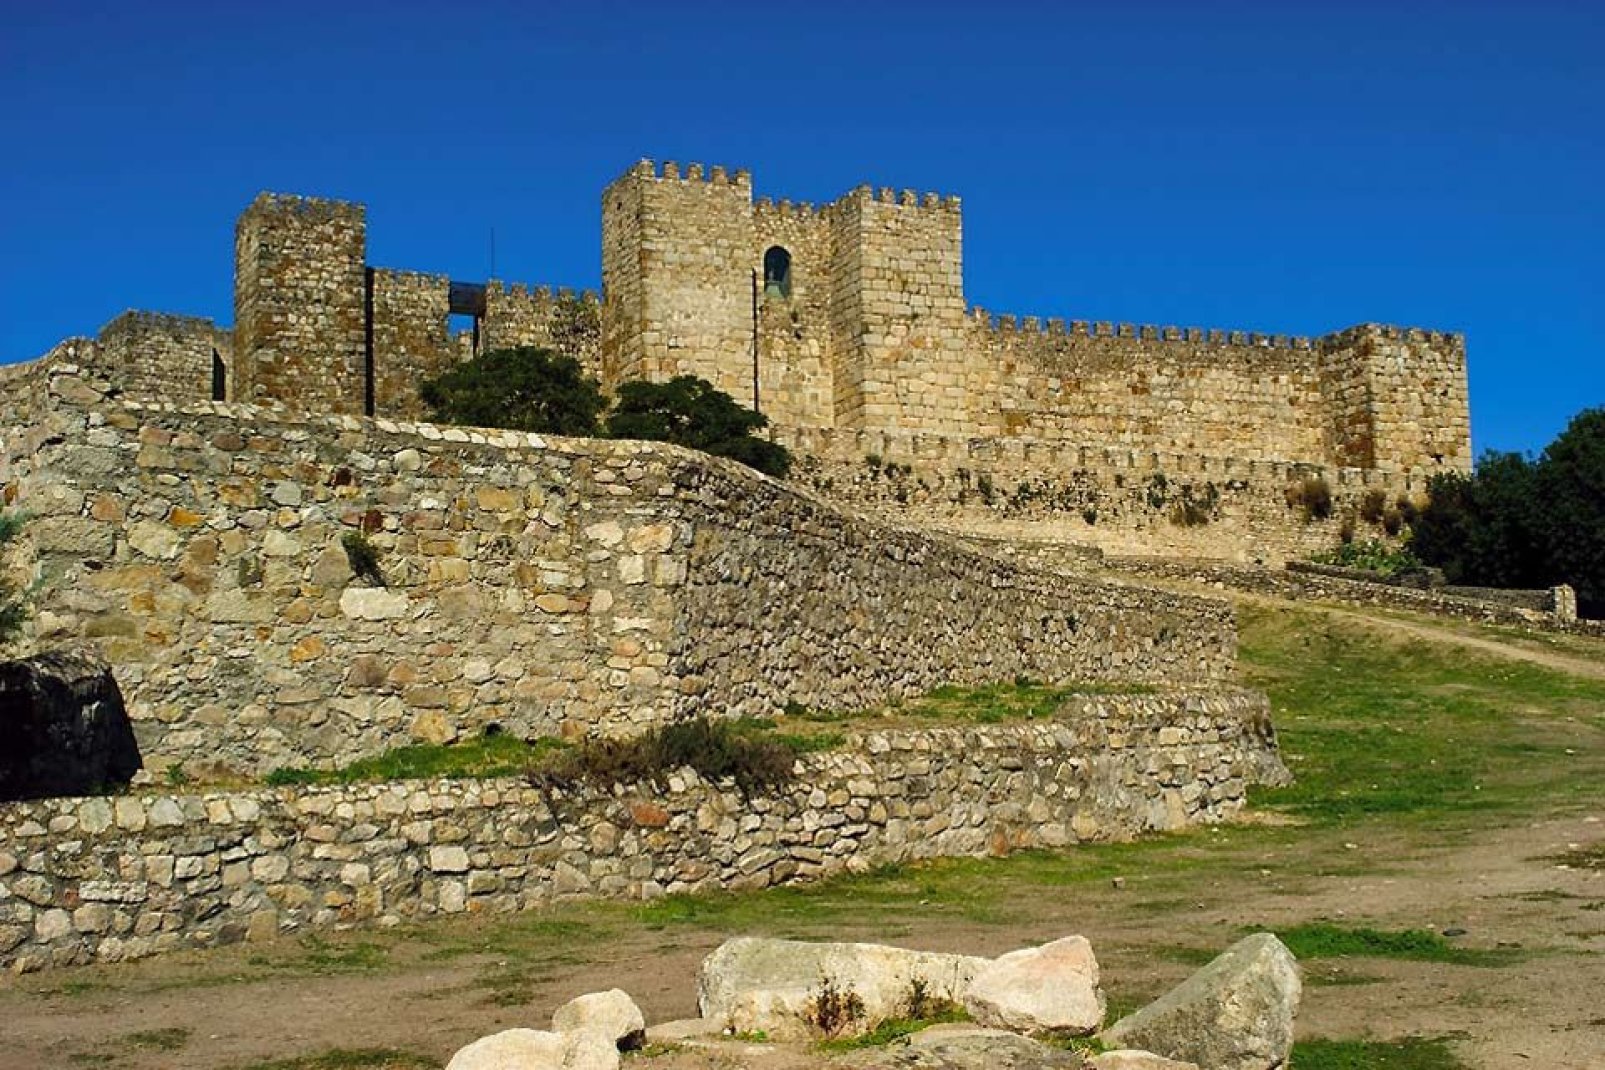 This castle overlooks the city of Trujillo. It was built in the 13th century on the site of an ancient Arab fortress.